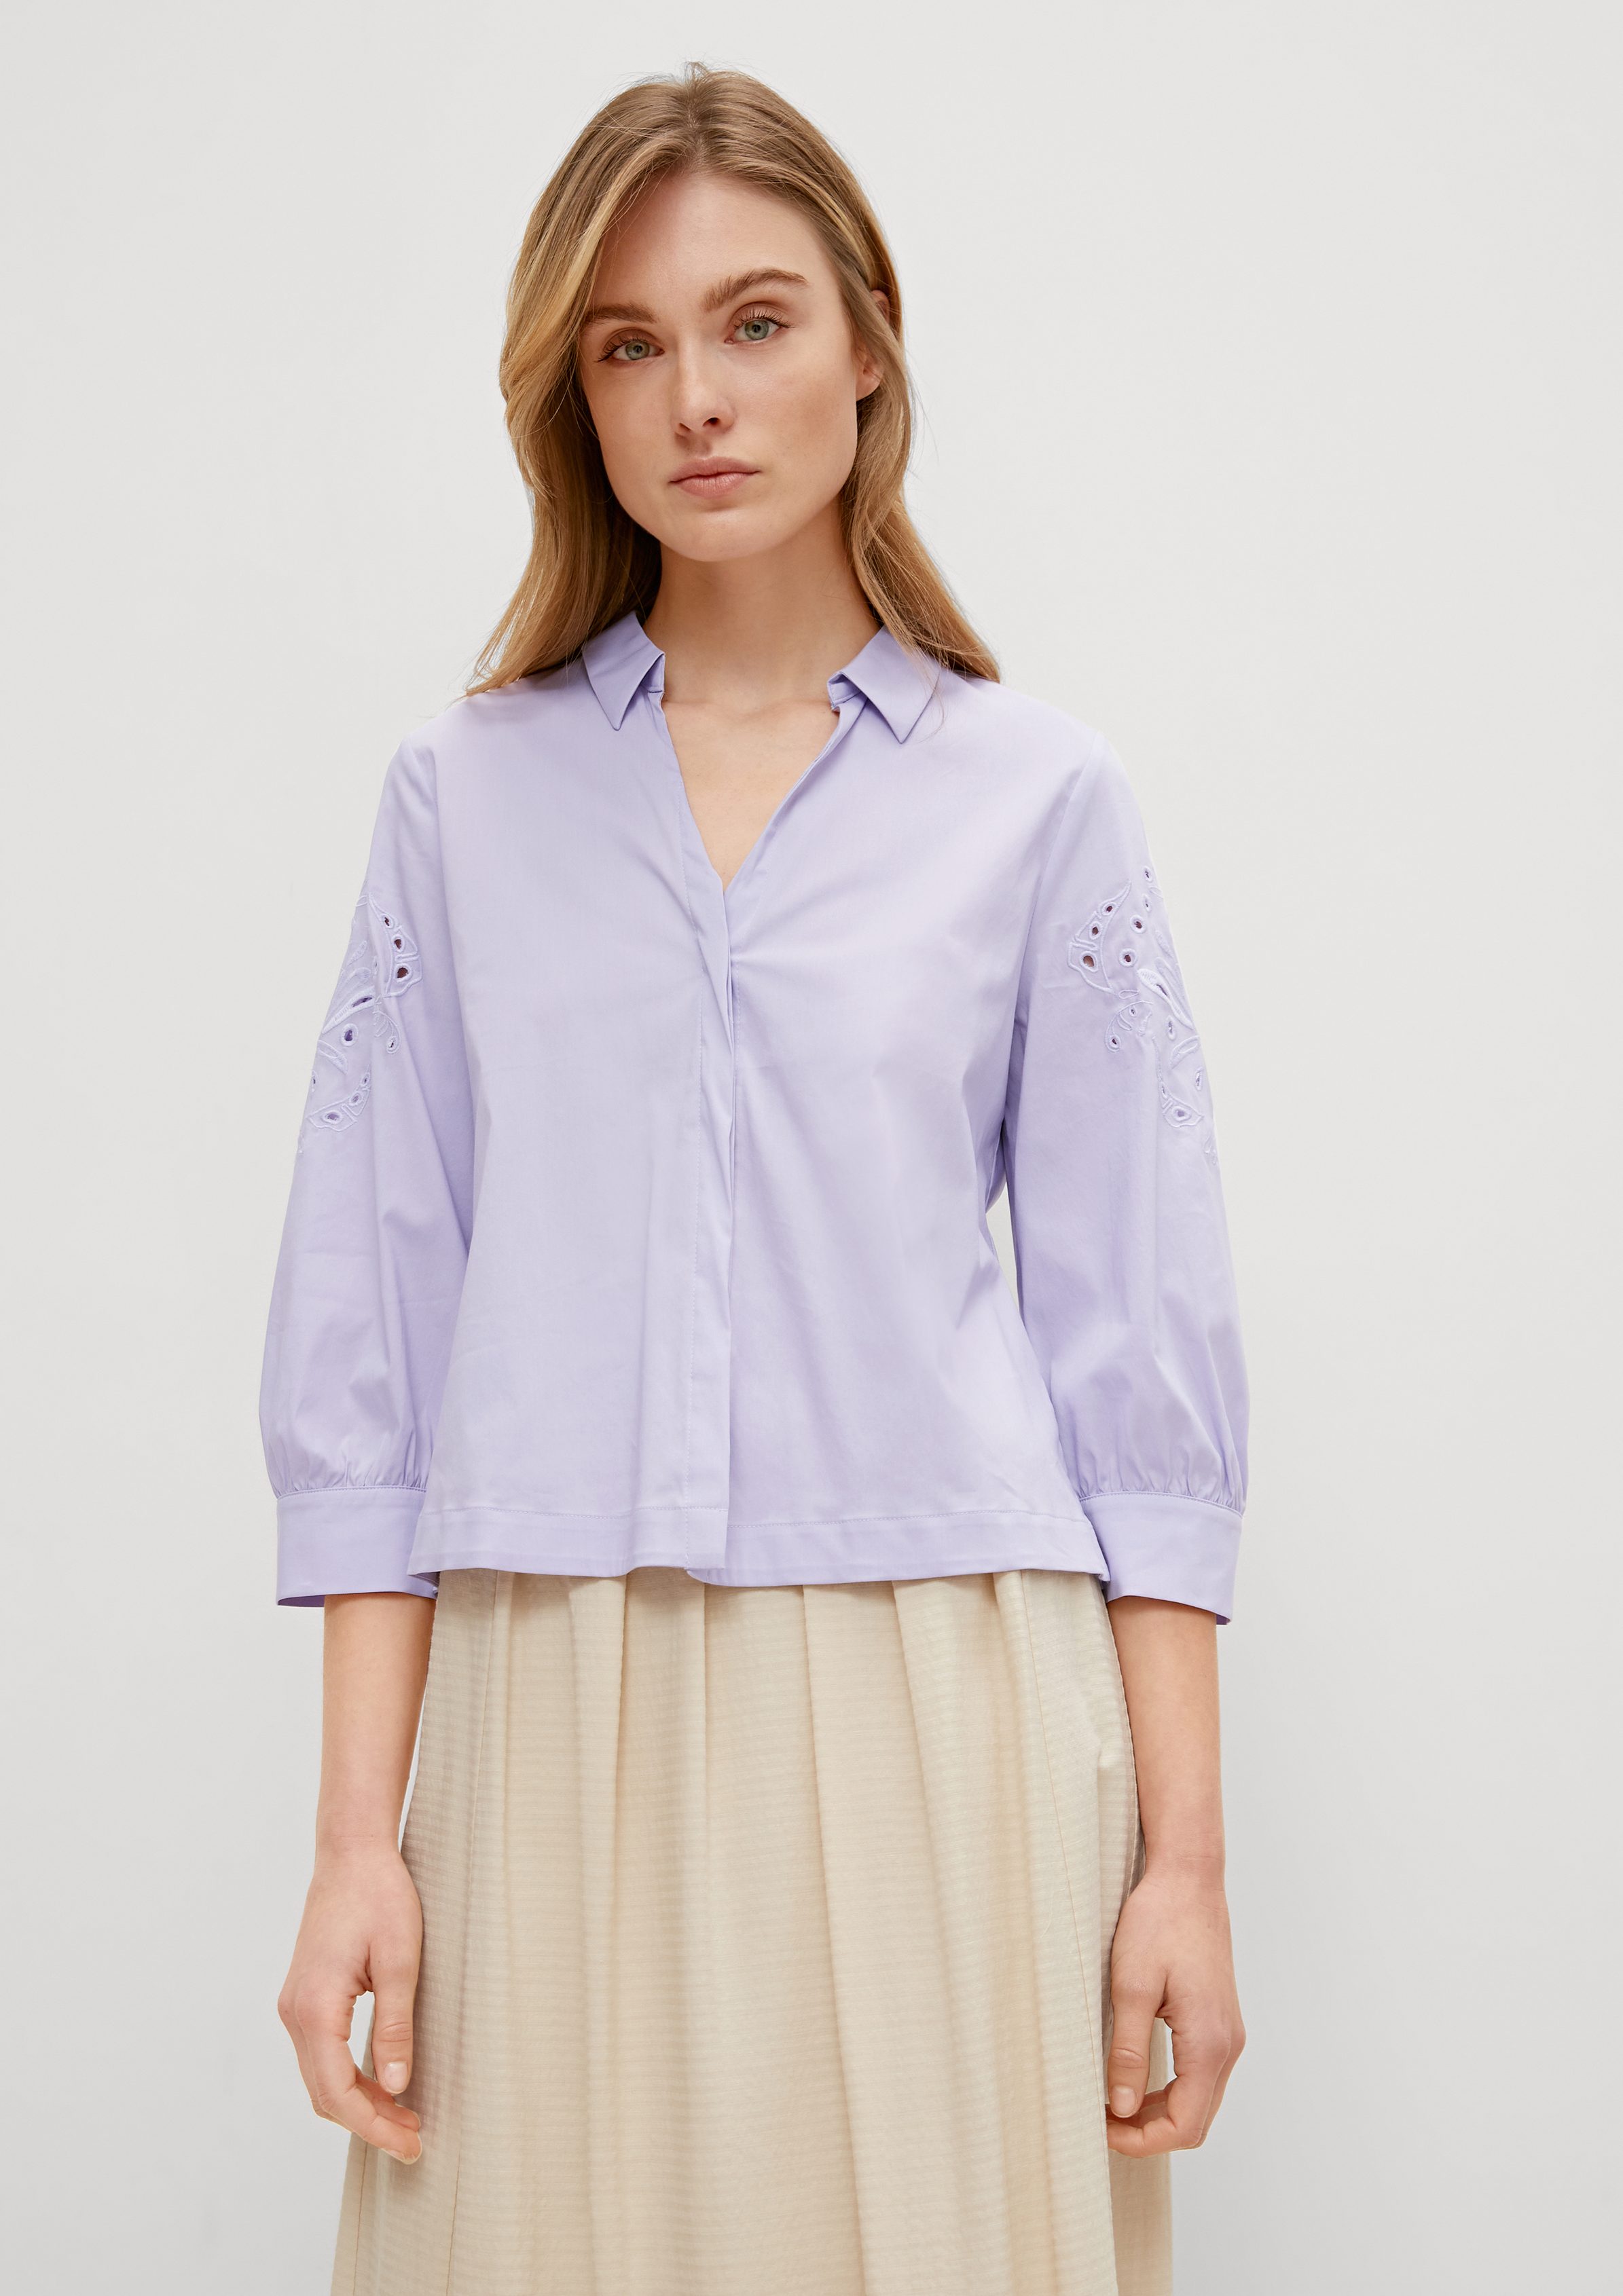 Broderie Anglaise Lochstickerei lilac mit 3/4-Arm-Shirt pale Comma Bluse